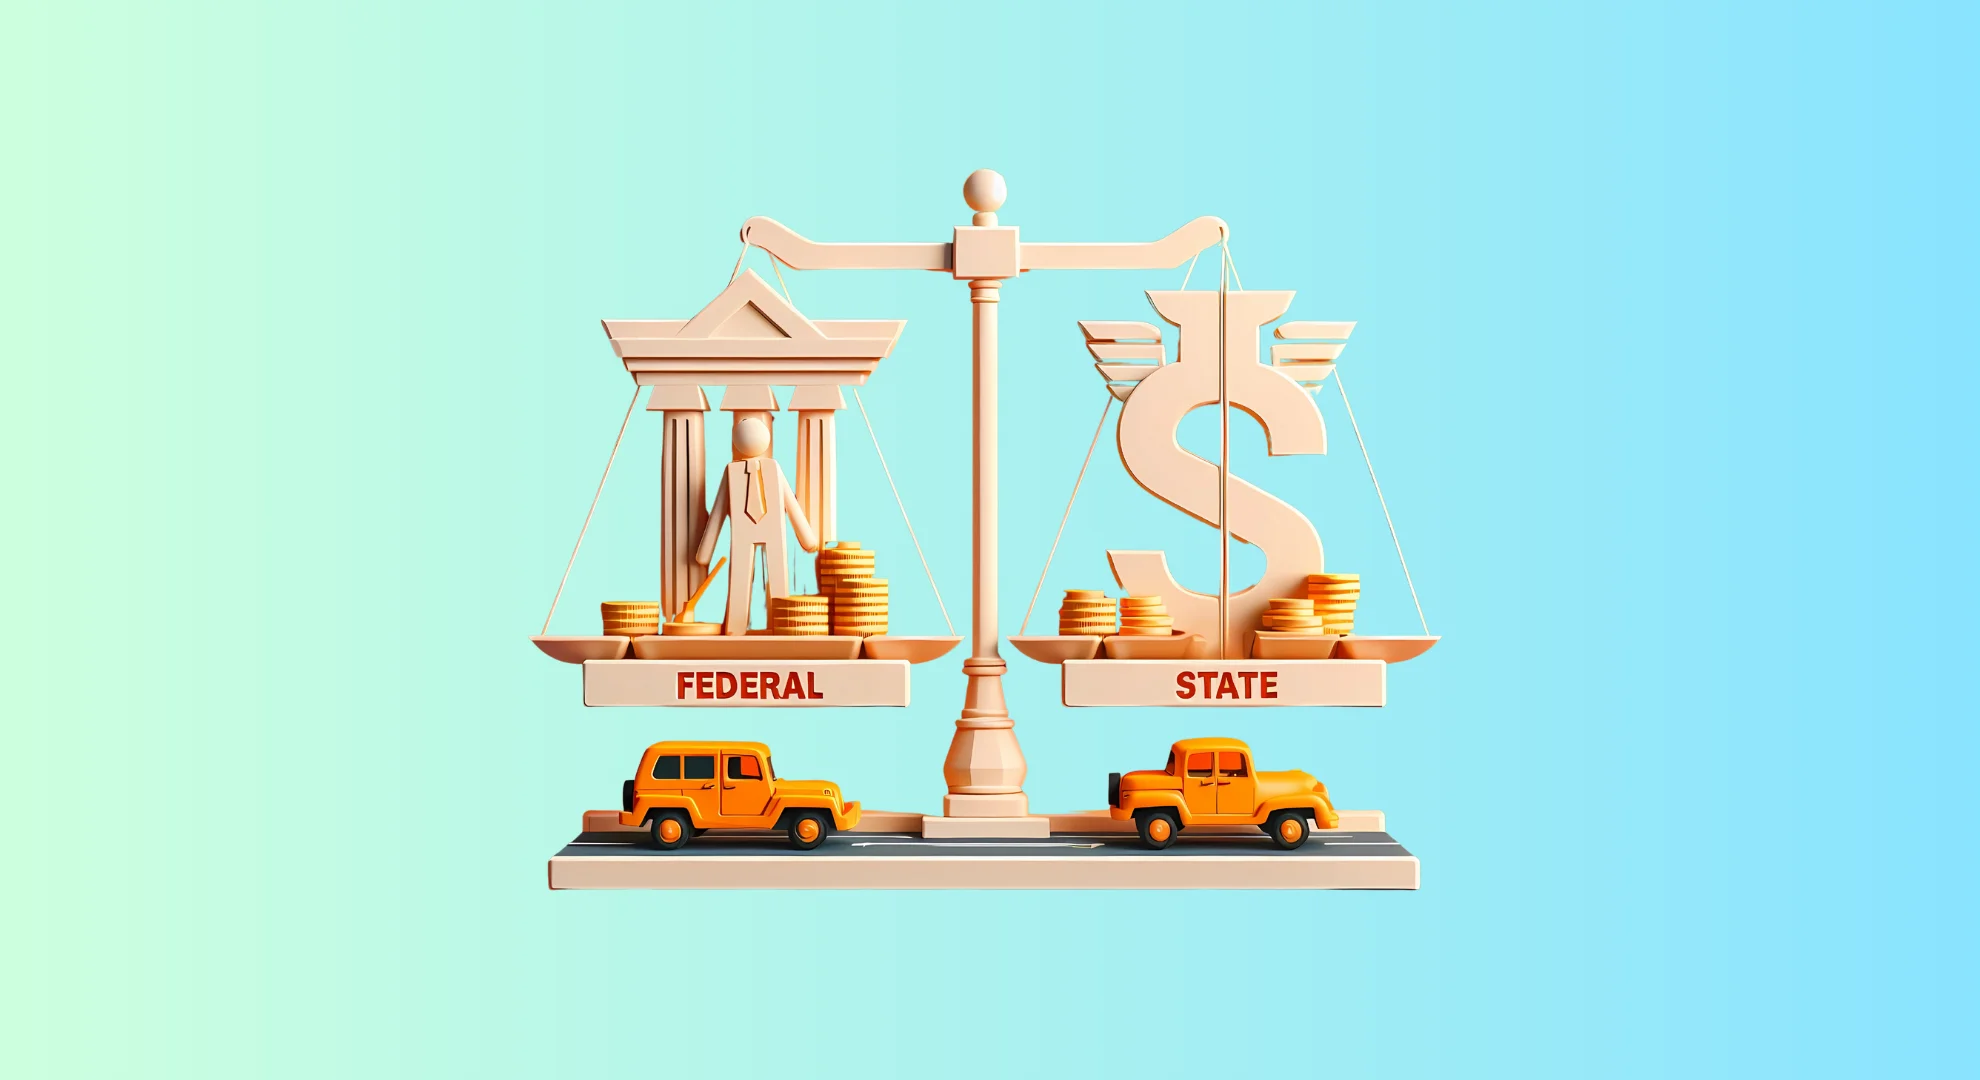 Federal Tax vs State Tax: Key Differences